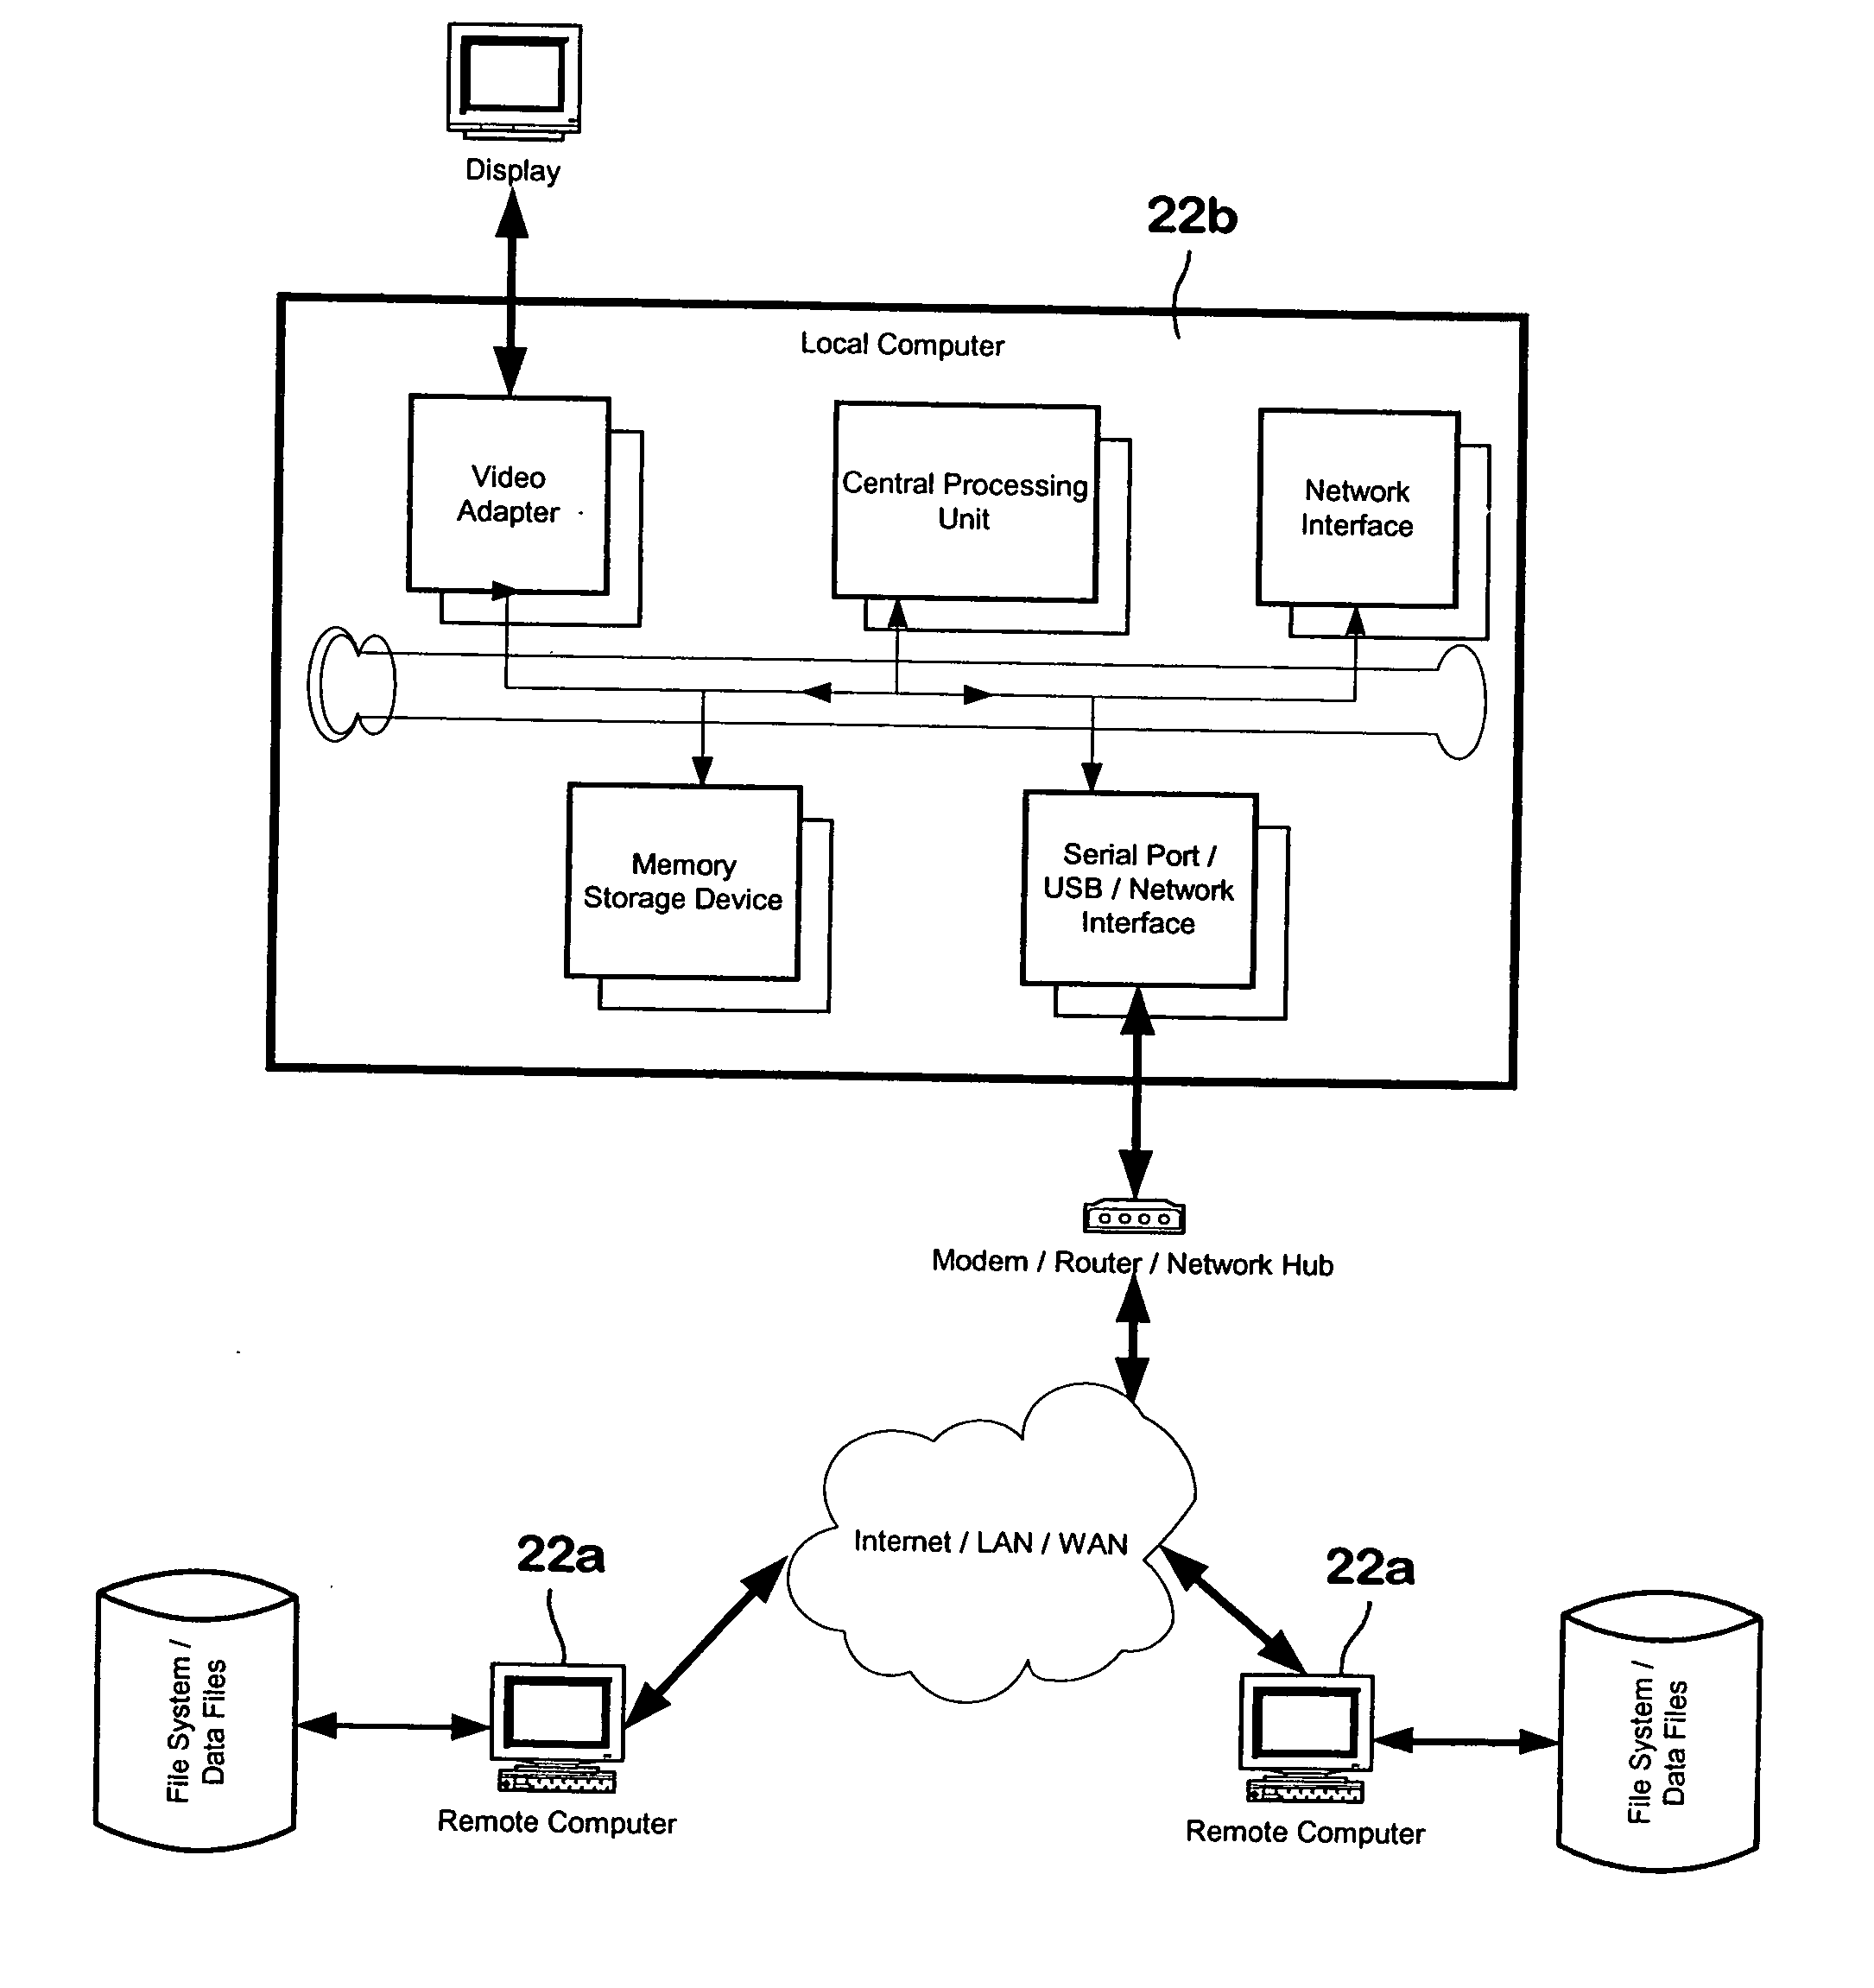 System and method for generating and maintaining software code